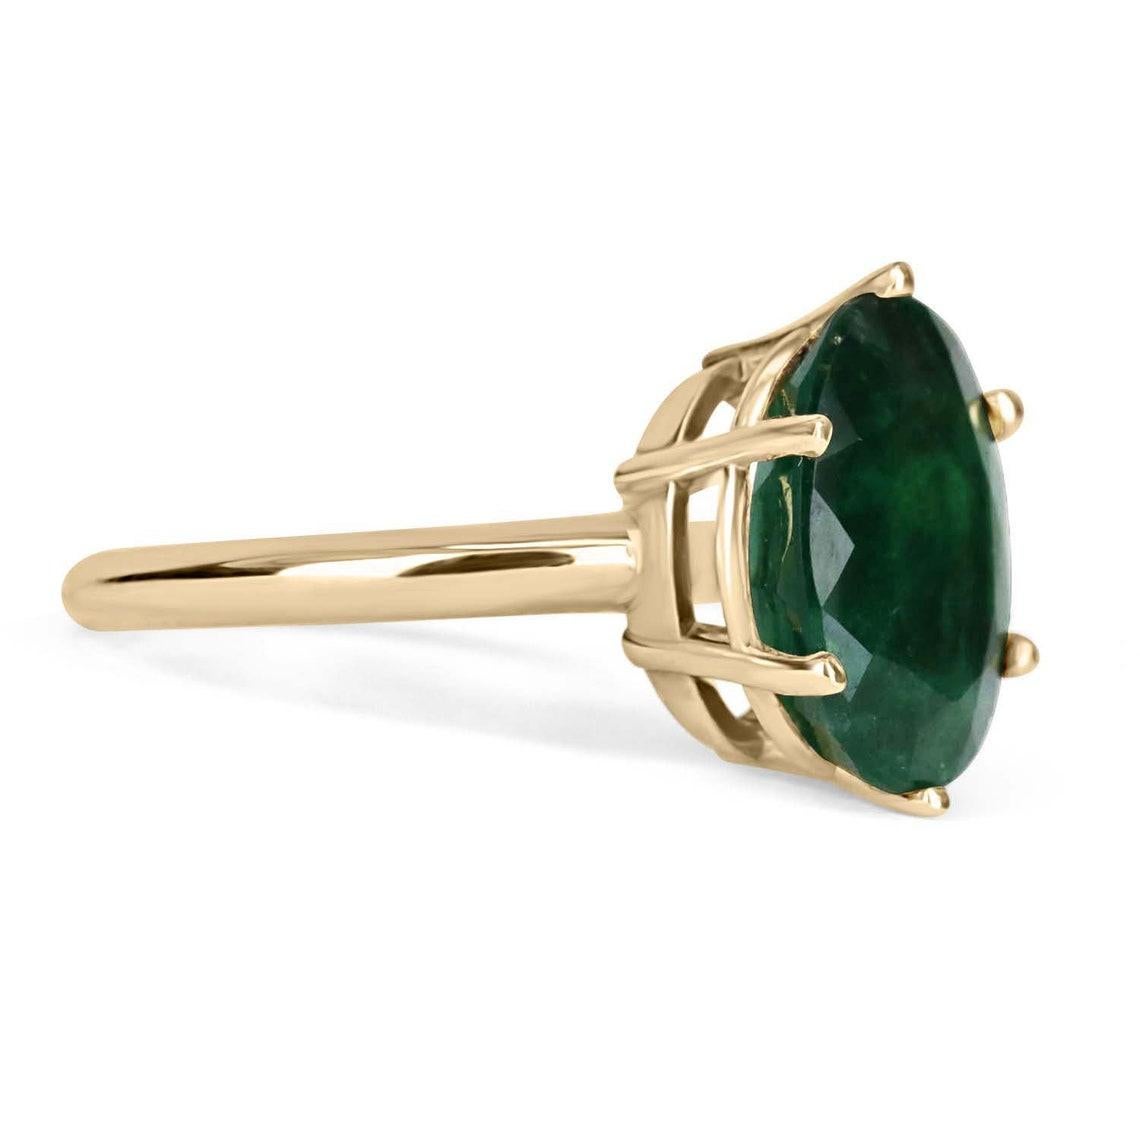 Featured is a gorgeous solitaire emerald ring. The gemstone carries a full large 4.80-carats, displaying a lovely rare dark-green color and natural Jardin within the earth-mined stone. Set in a 14K yellow gold, 6-Prong, solitaire setting.

Setting